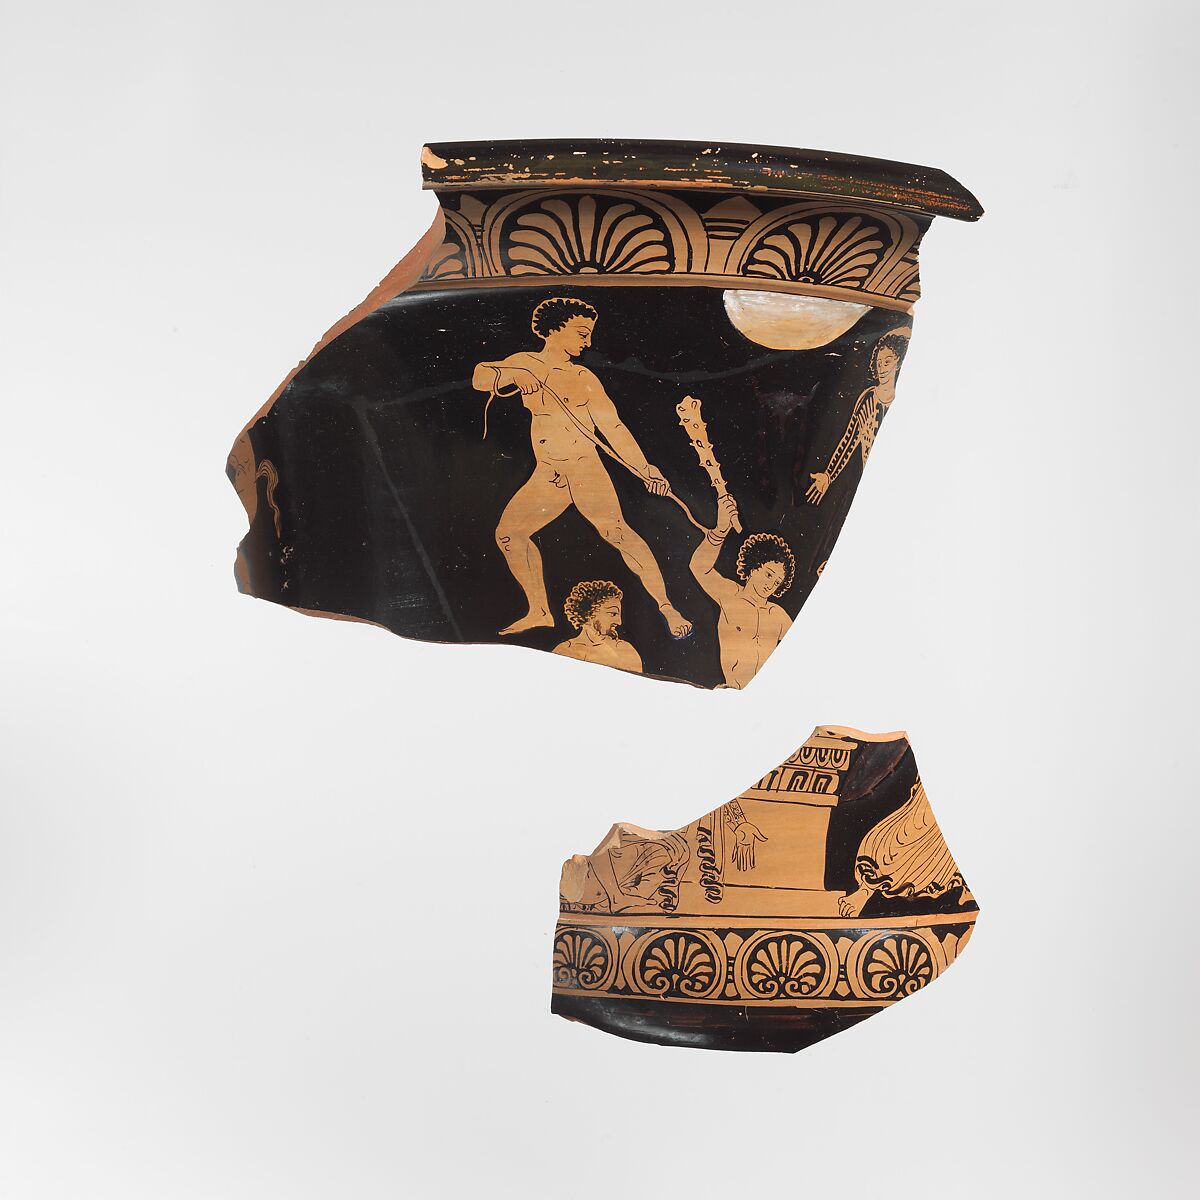 Fragments of a terracotta calyx-krater (mixing bowl), Very close in style to the work of the Dolon Painter, Terracotta, Greek, South Italian, Lucanian 